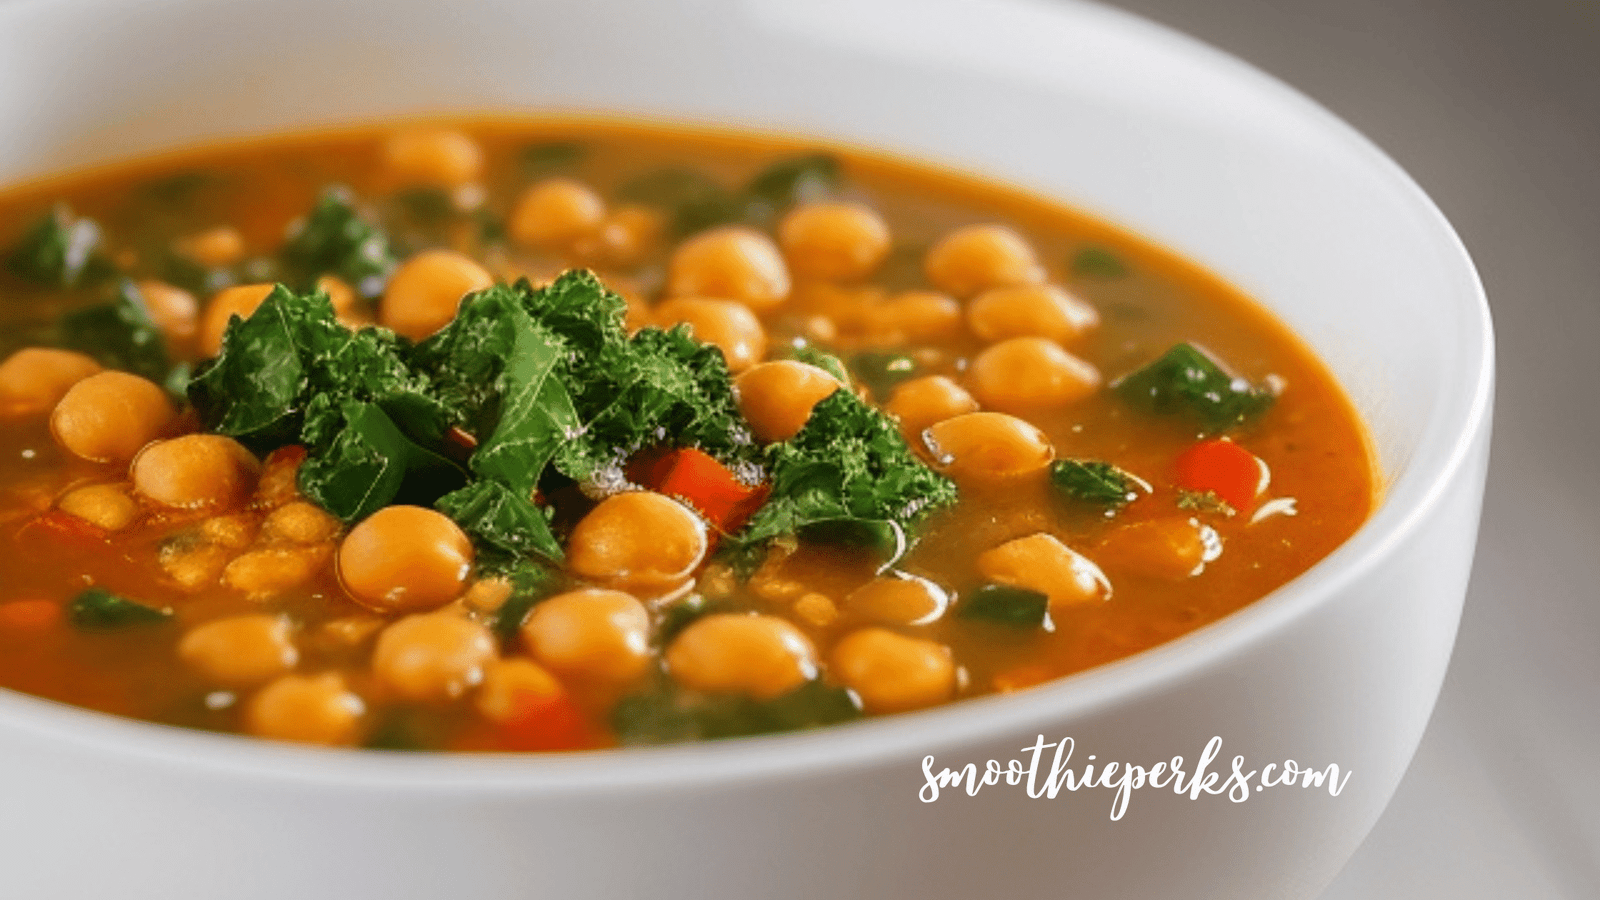 Spicy Chickpea and Kale Soup